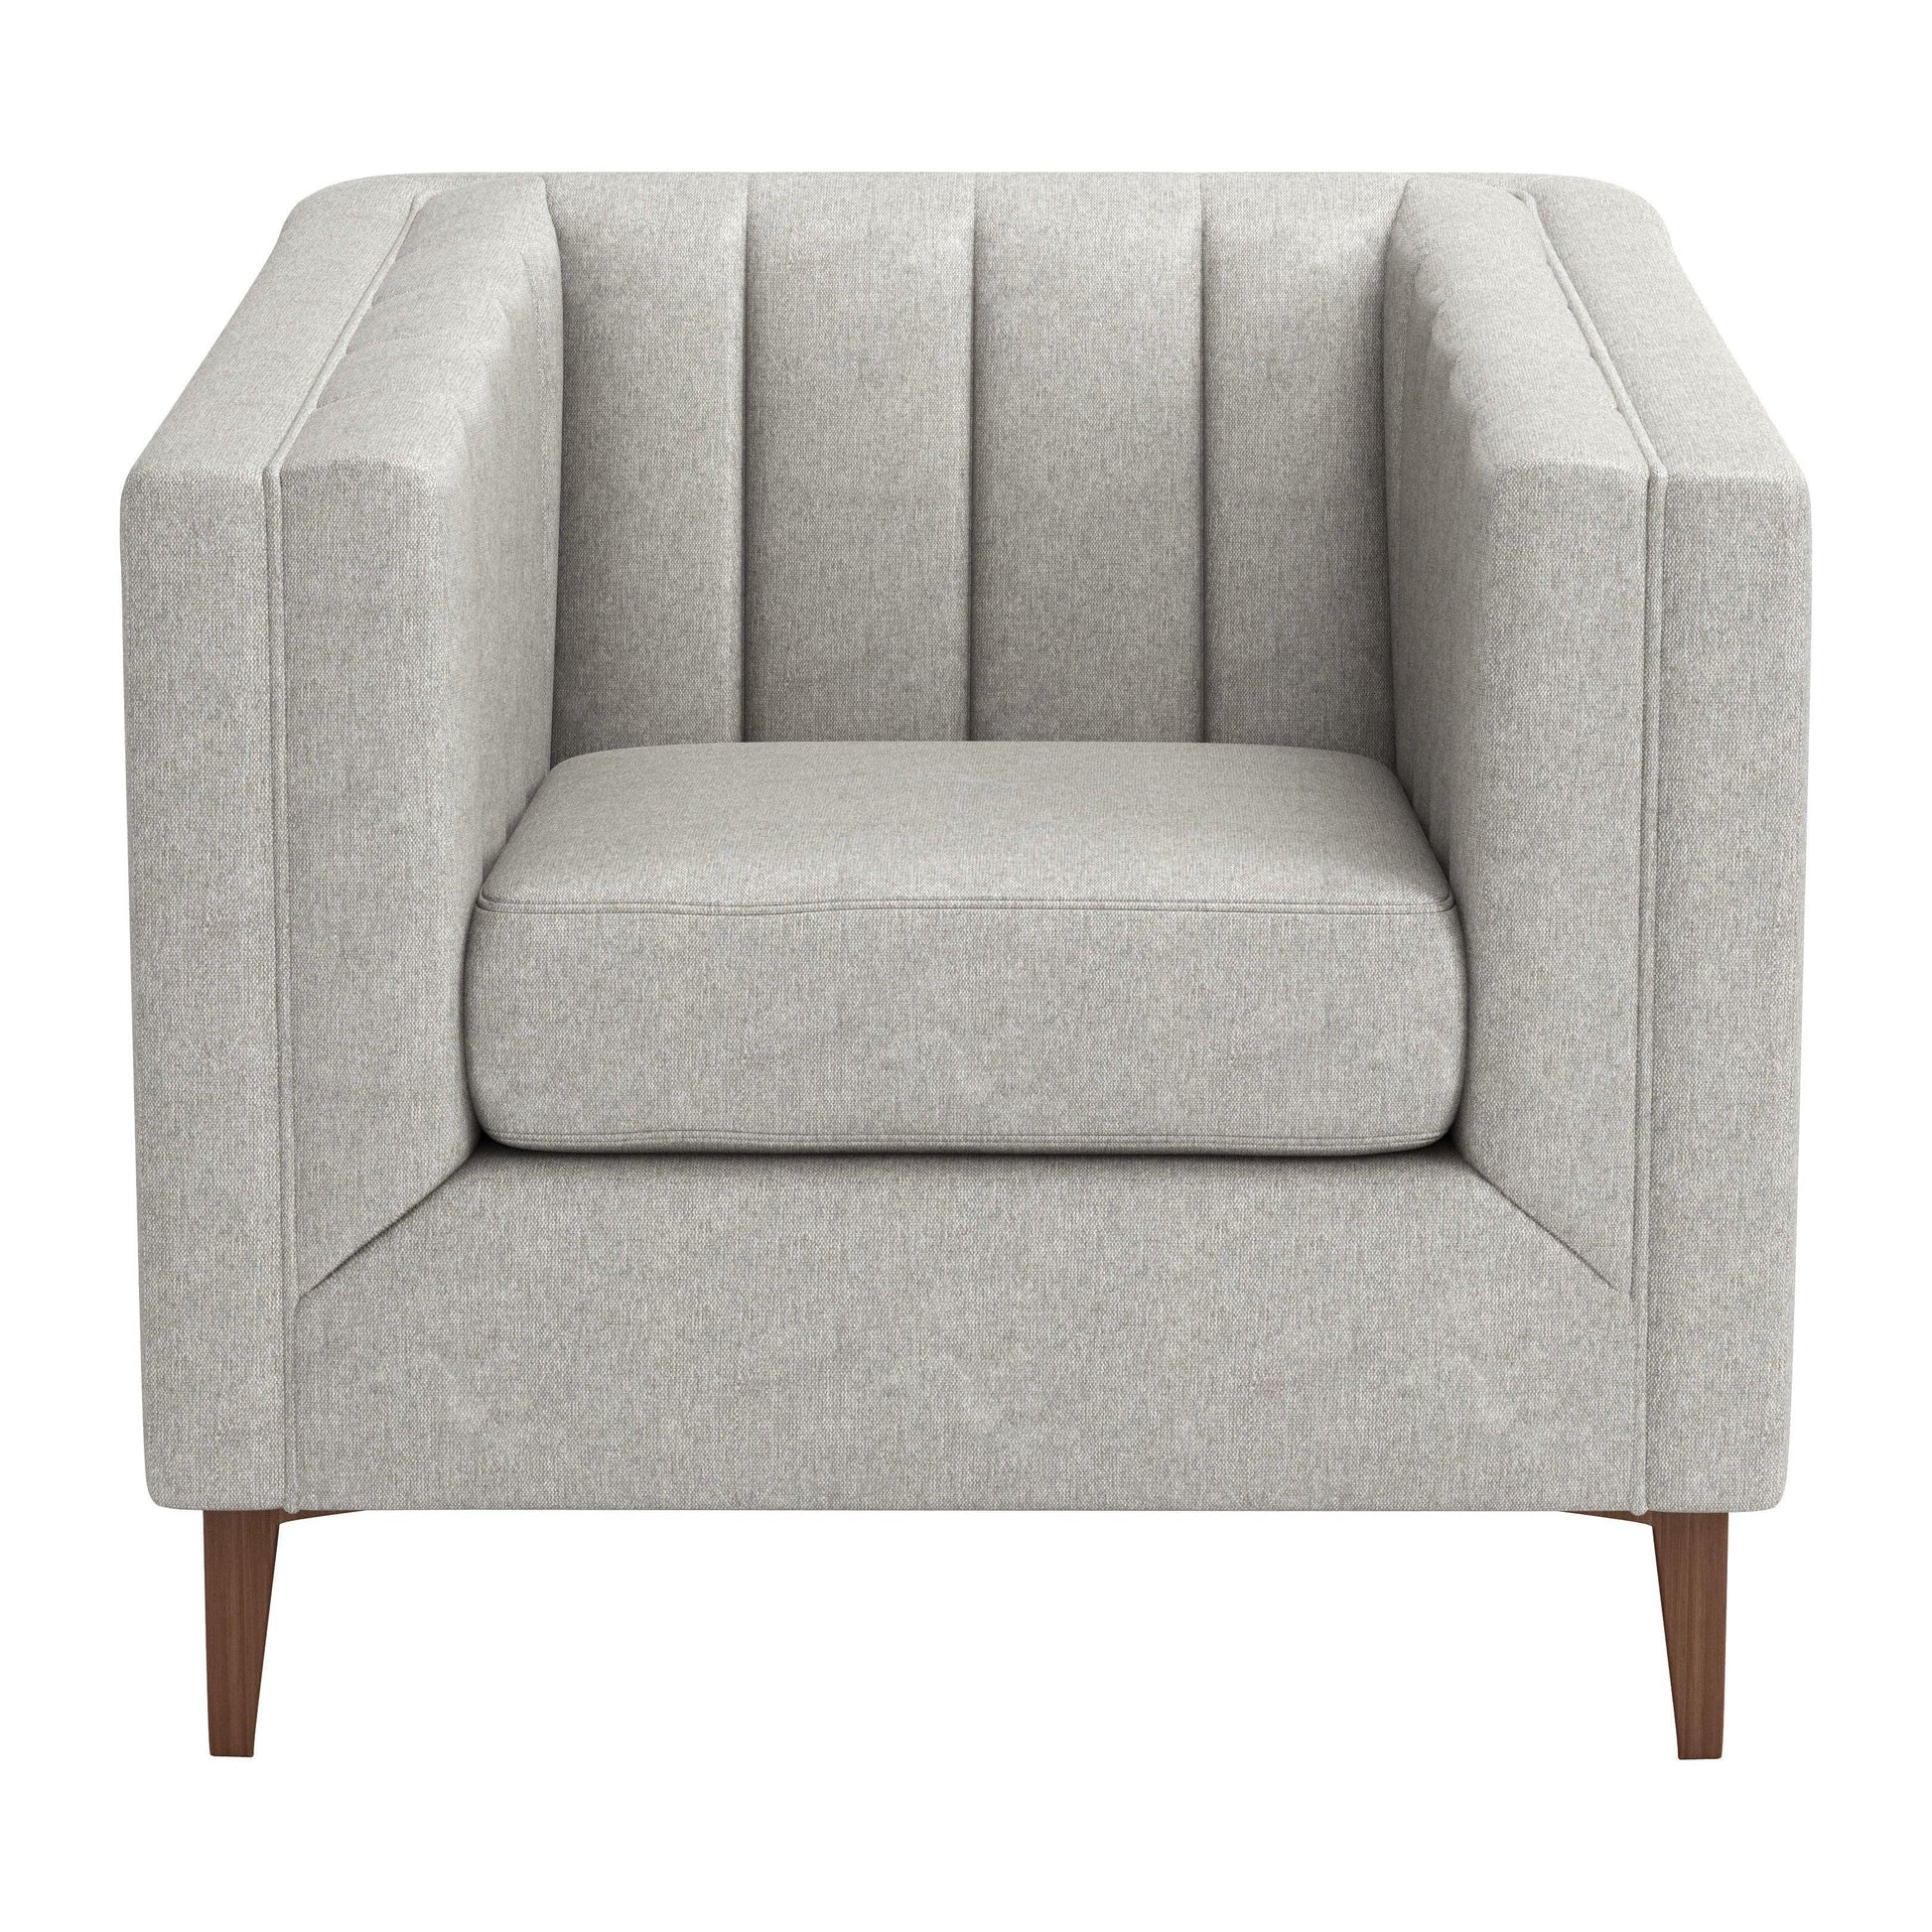 Nantucket Arm Chair Light Gray - Sideboards and Things Brand_Zuo Modern, Color_Brown, Color_Gray, Materials_Upholstery, Product Type_Arm Chair, Upholstery Type_Fabric Blend, Upholstery Type_Leather, Upholstery Type_Polyester, Upholstery Type_Vegan Leather